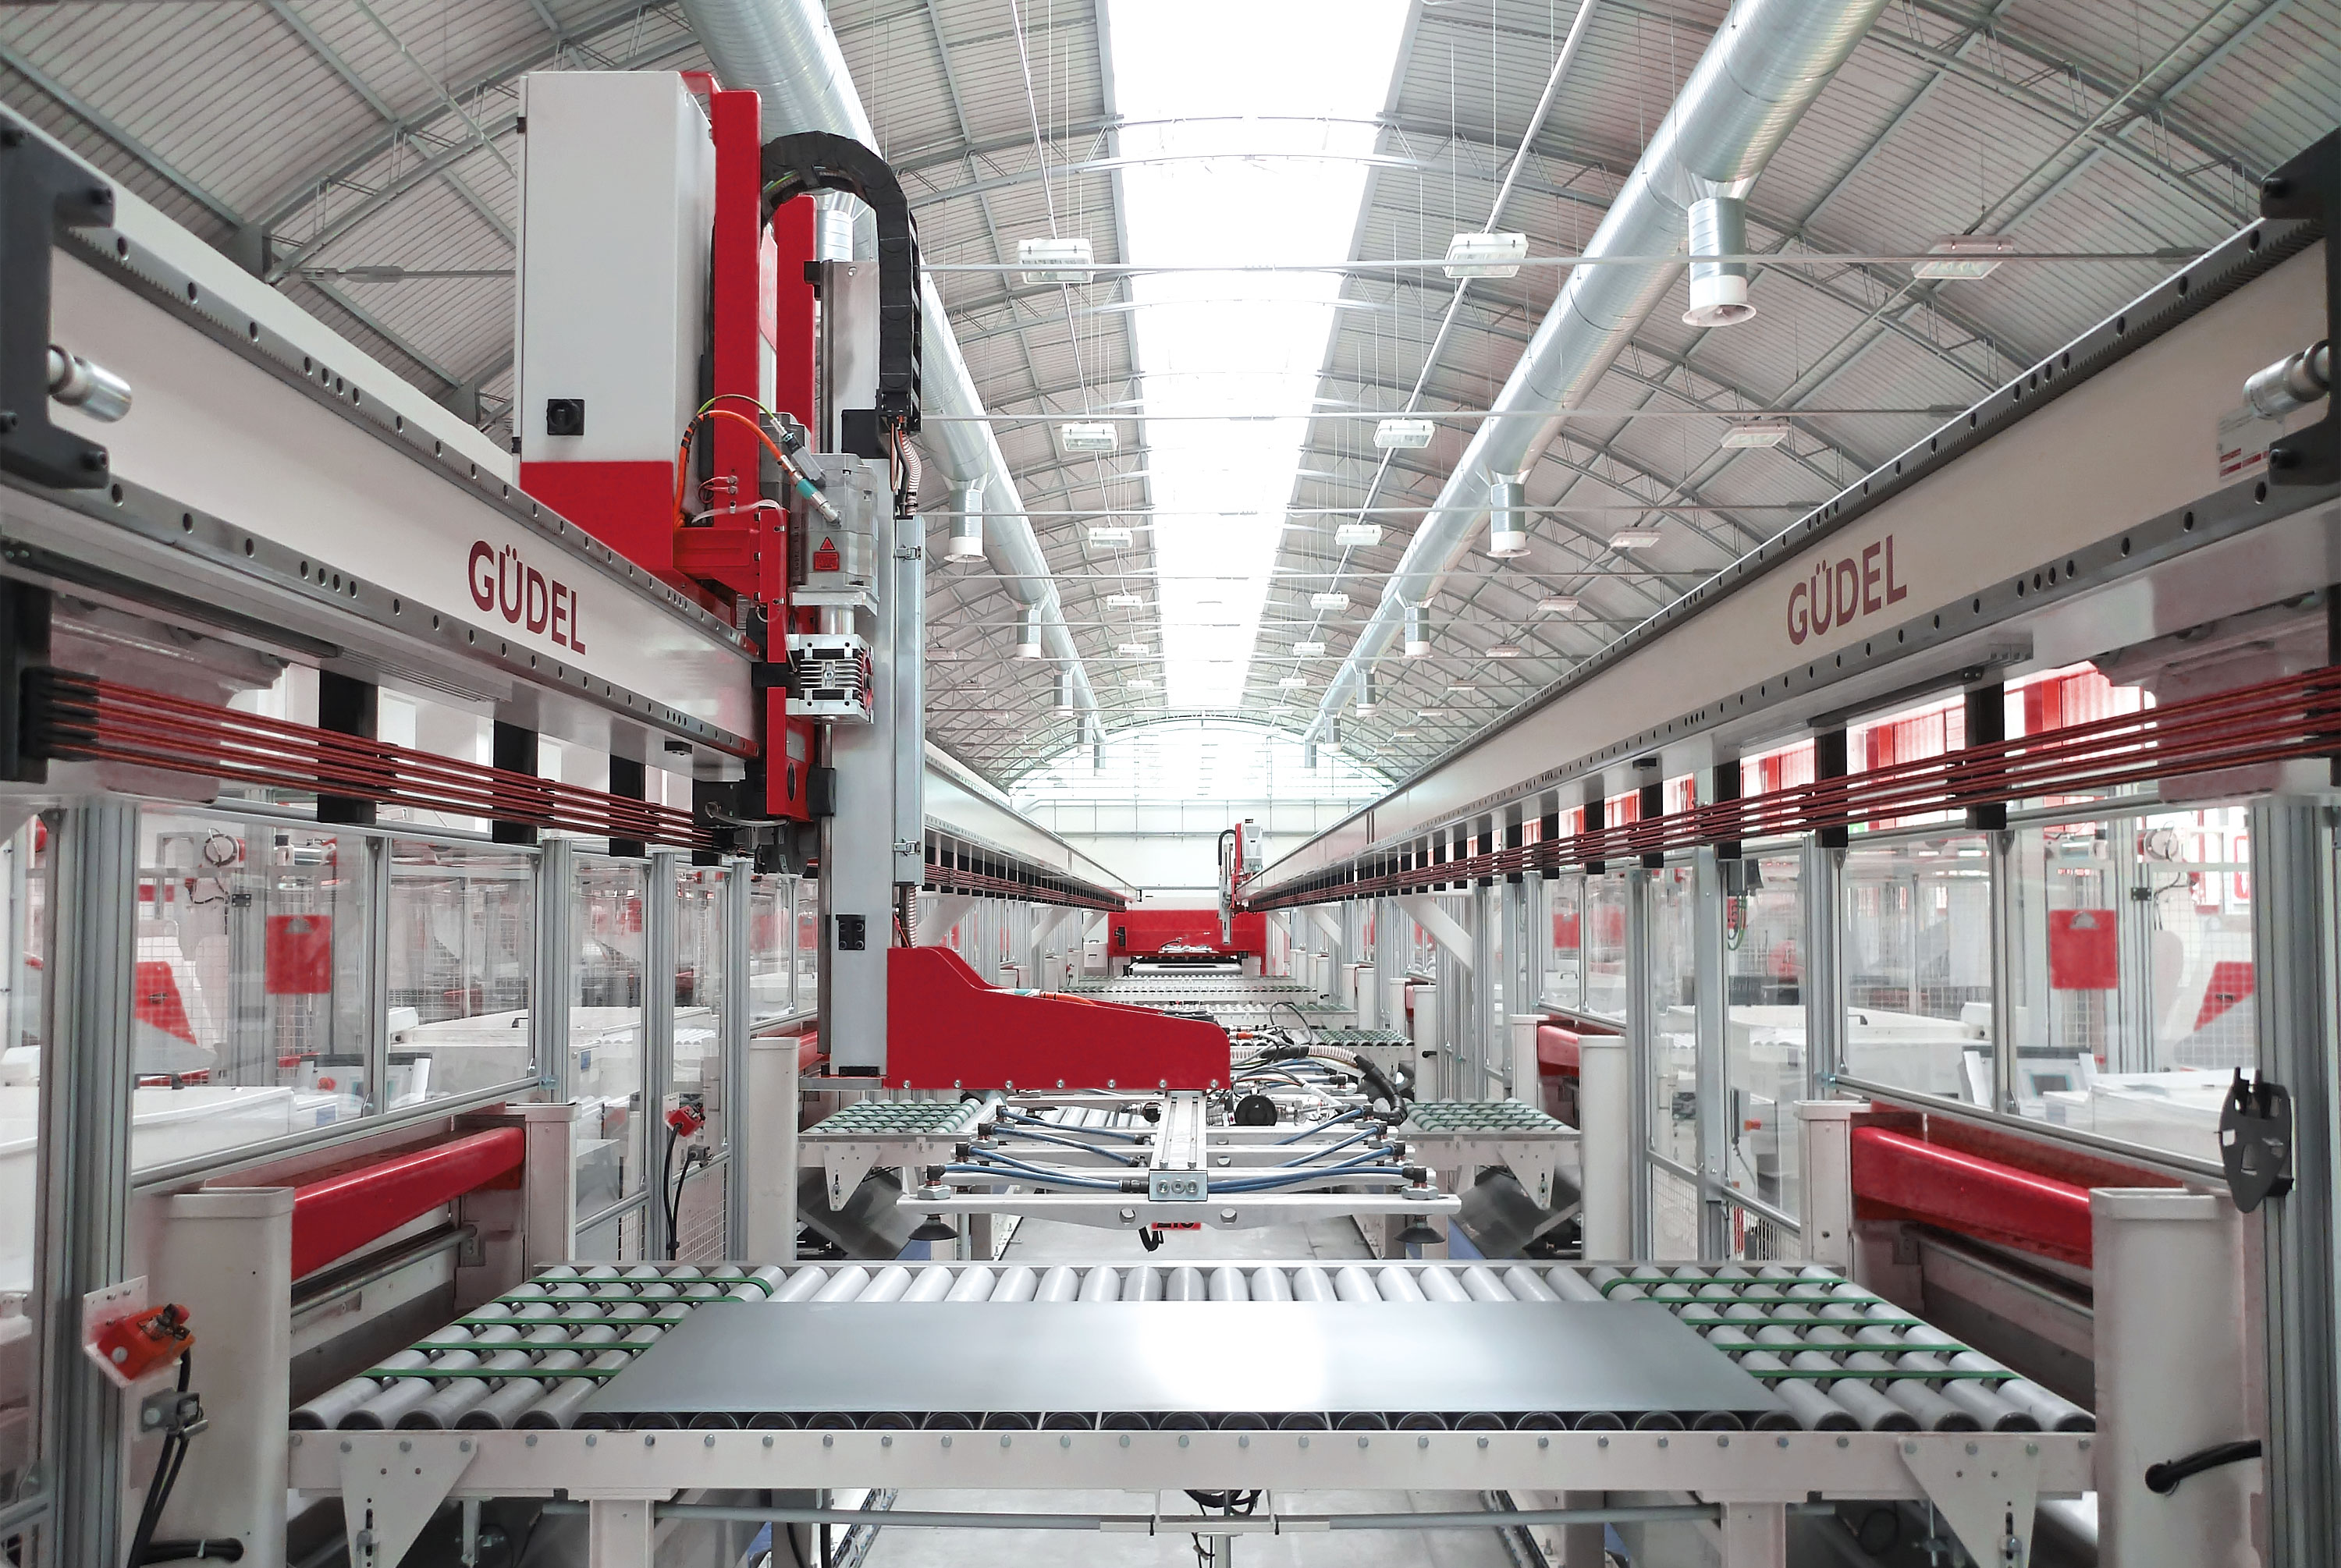 A clean and bright inside of a factory with several machines lined up left and right. On two white rails at the upper half of the picture Güdel is written in red large letters. In the foreground, a sheet of metal lays on a conveyor belt.